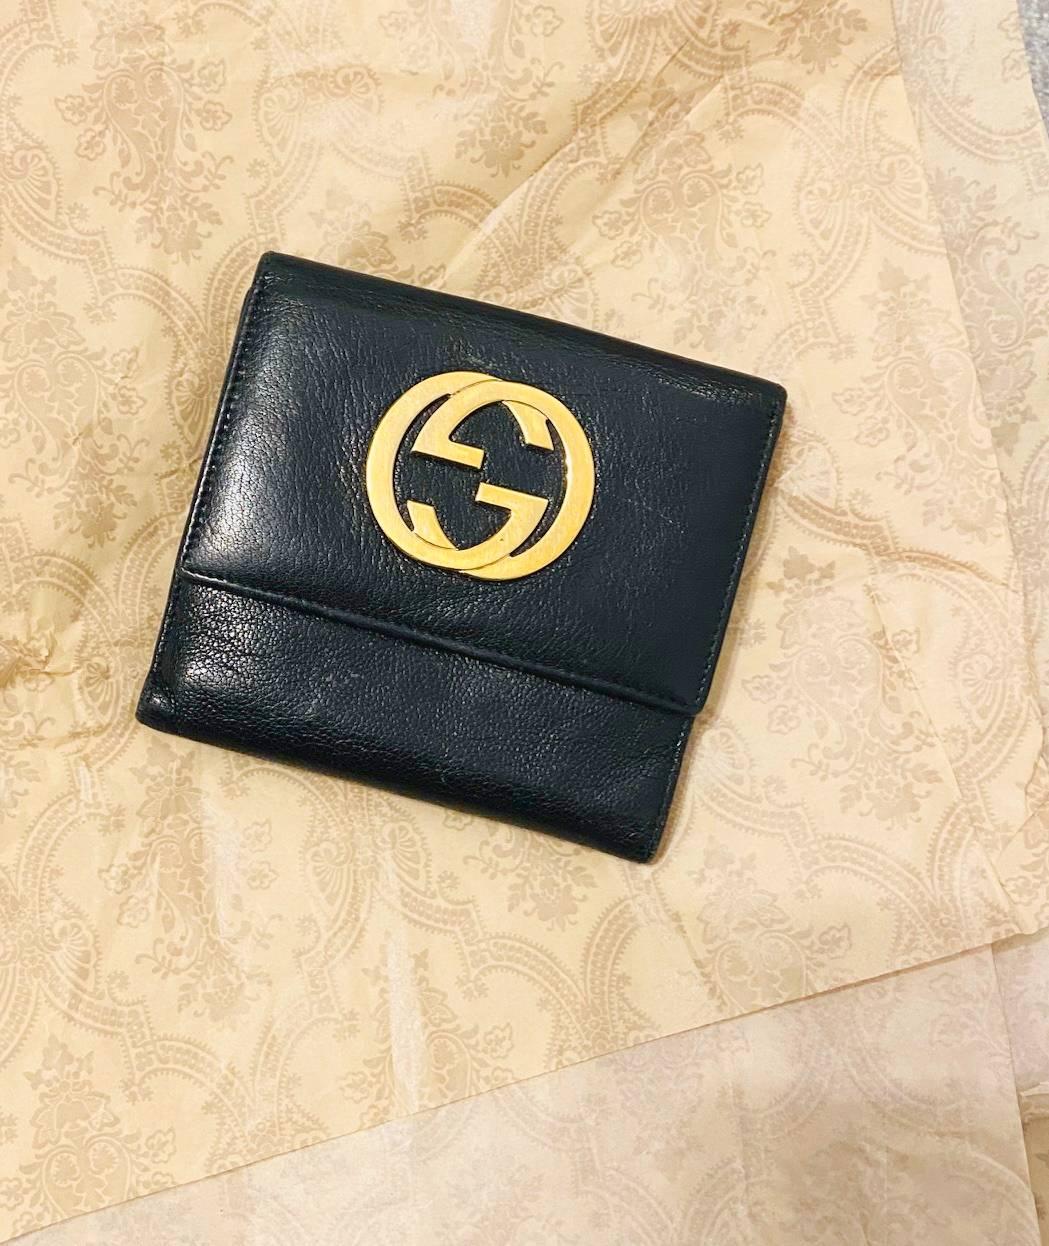 Gucci Tri-Folded Leather Wallet, coin and banknotes compartments, gold front interlocking logo, black leather, Made in Italy 

Dimensions: 12.5x12.5x3.5cm / 4.9x4.9x1.3in 

Conditions: 2000s, vintage, good, minimal wear 